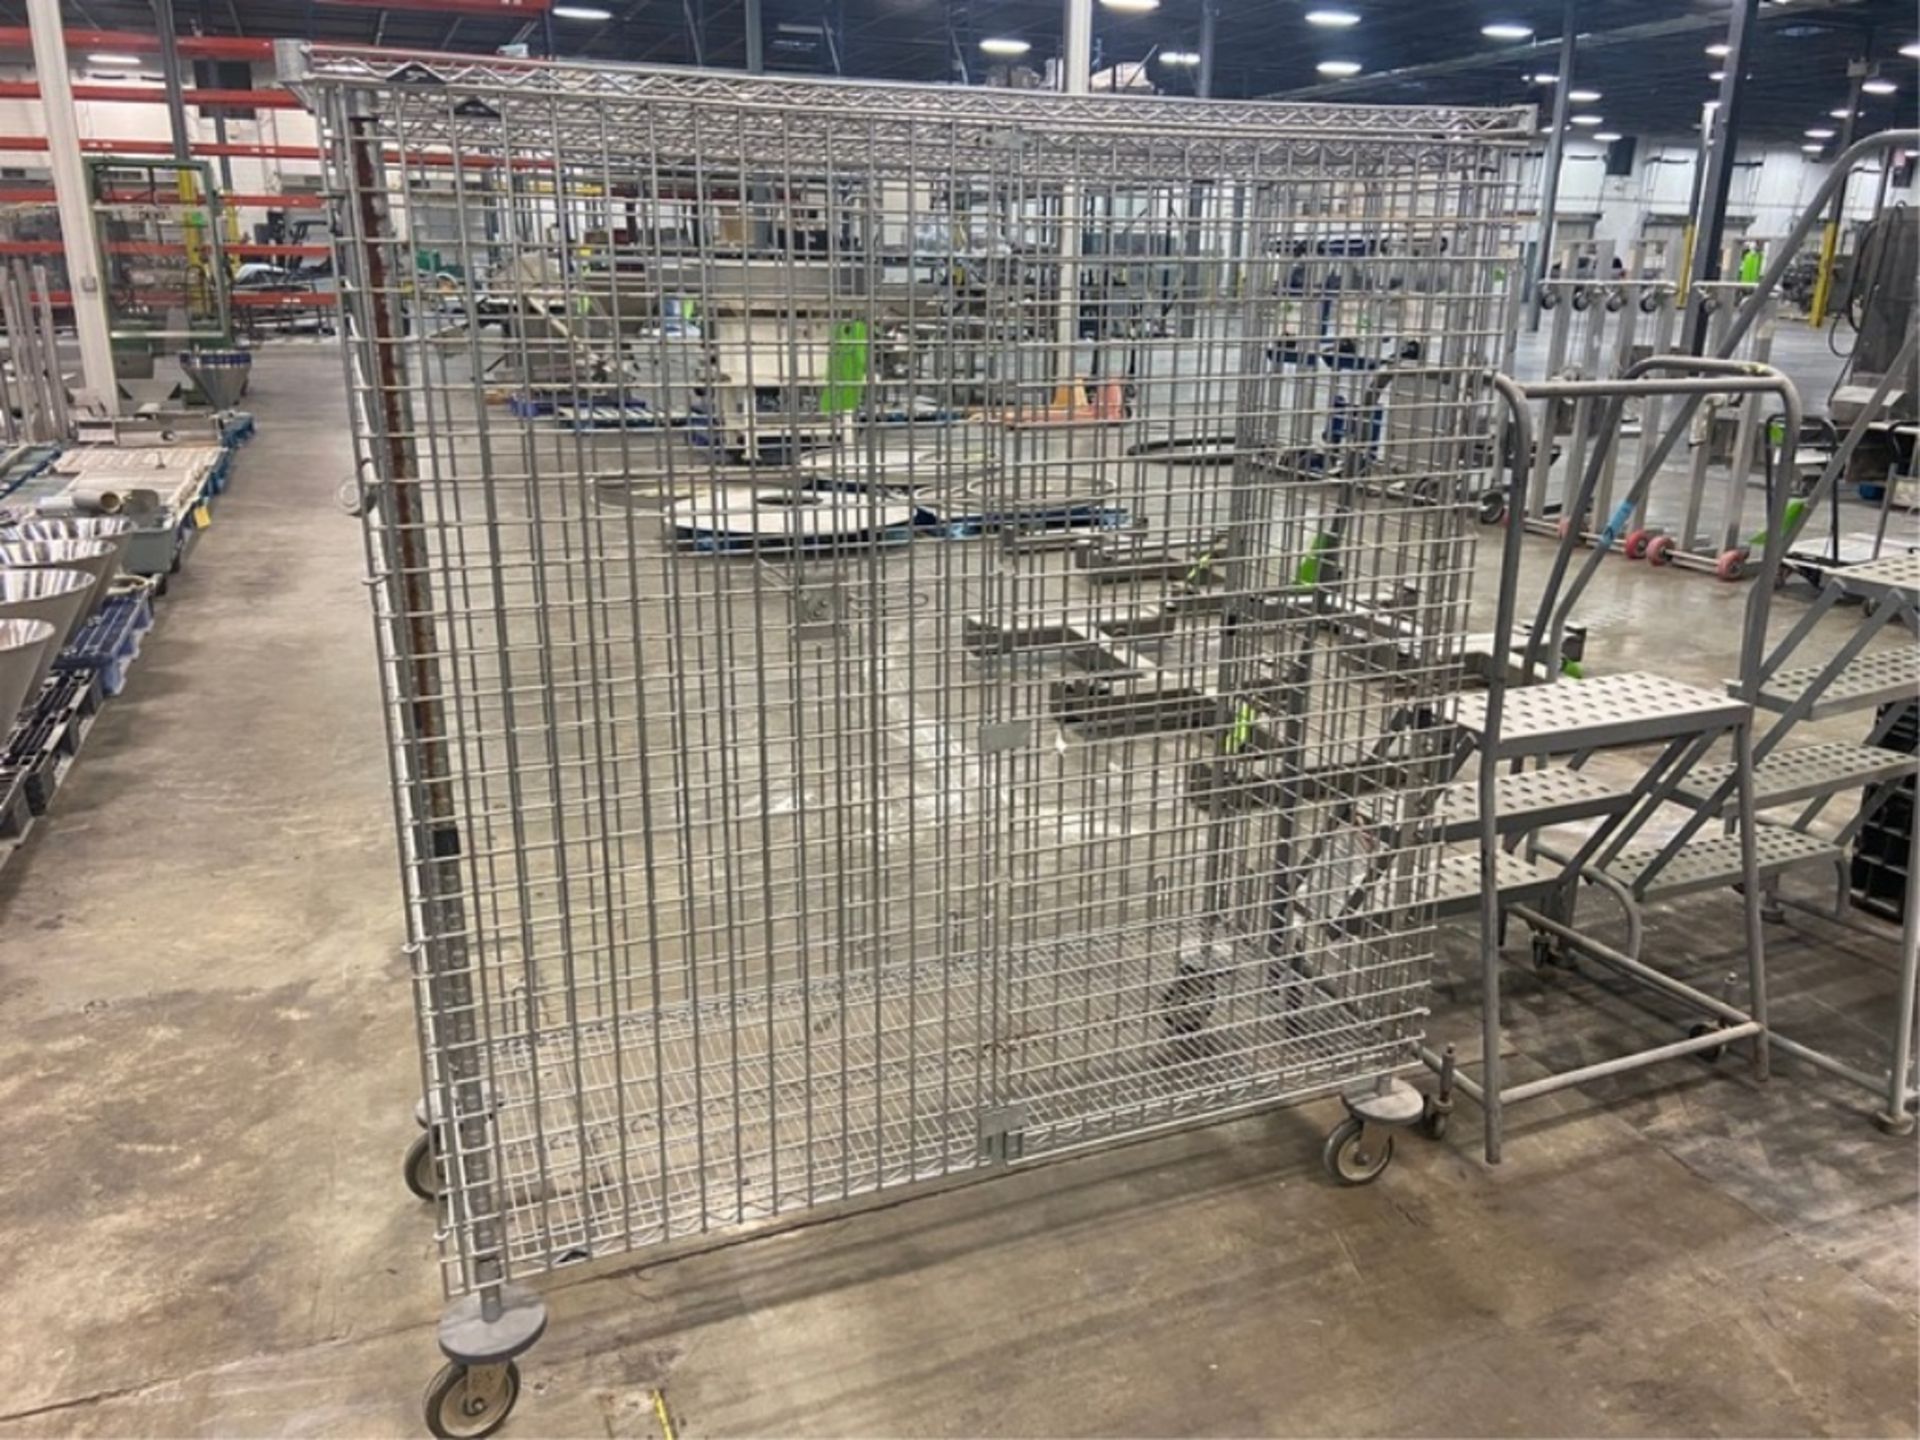 Portable Cage, Overall Dims.: Aprox. 62-1/2" L x 25" W x 68" H, Mounted on Casters (RIGGING, - Image 2 of 2